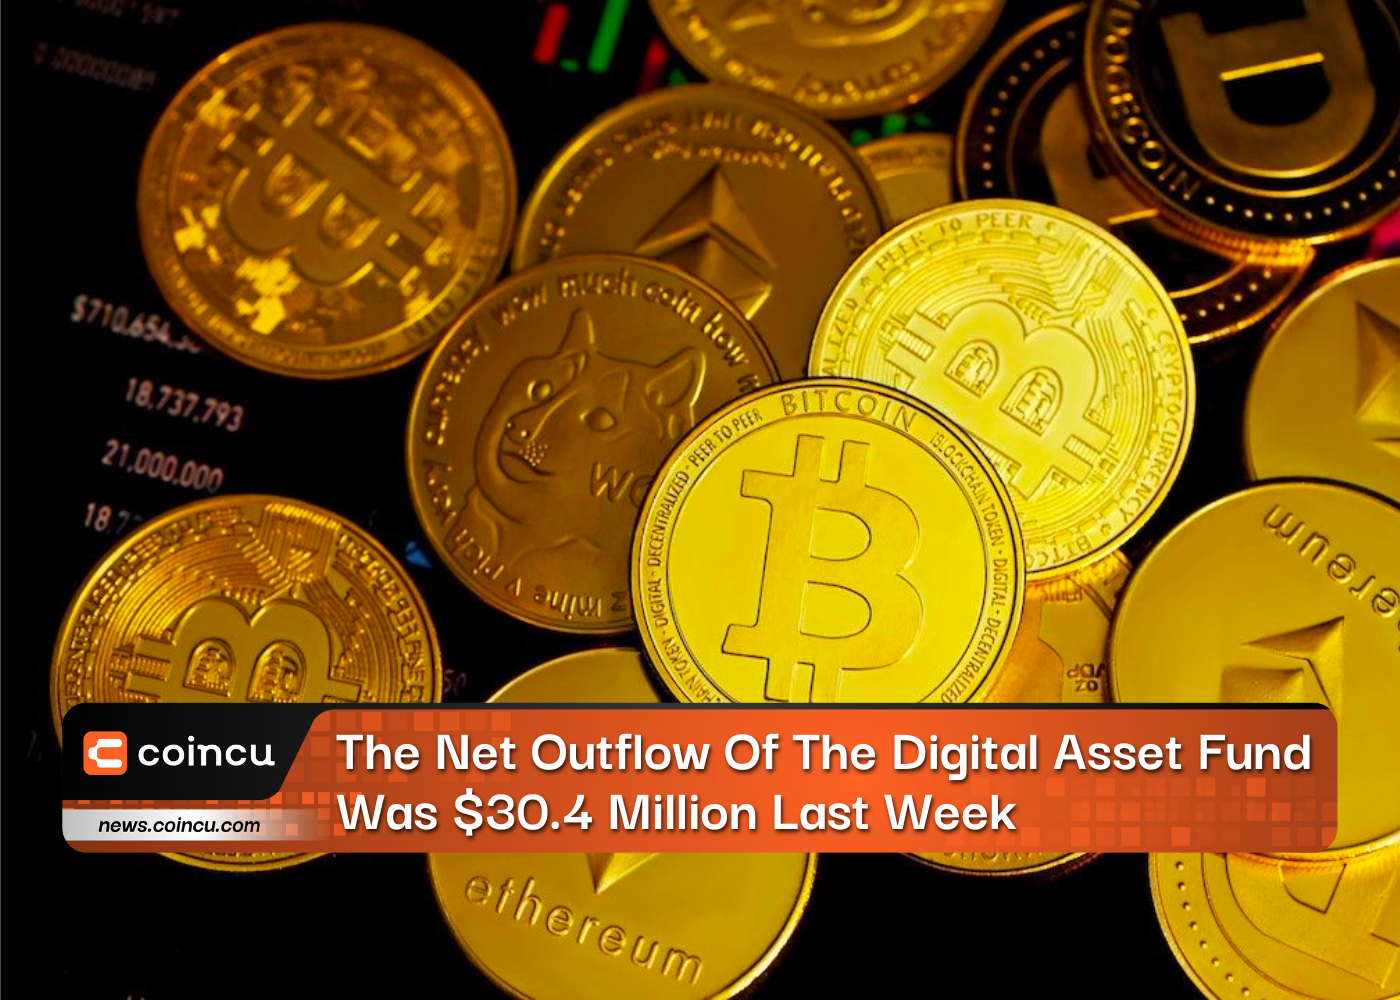 The Net Outflow Of The Digital Asset Fund Was $30.4 Million Last Week